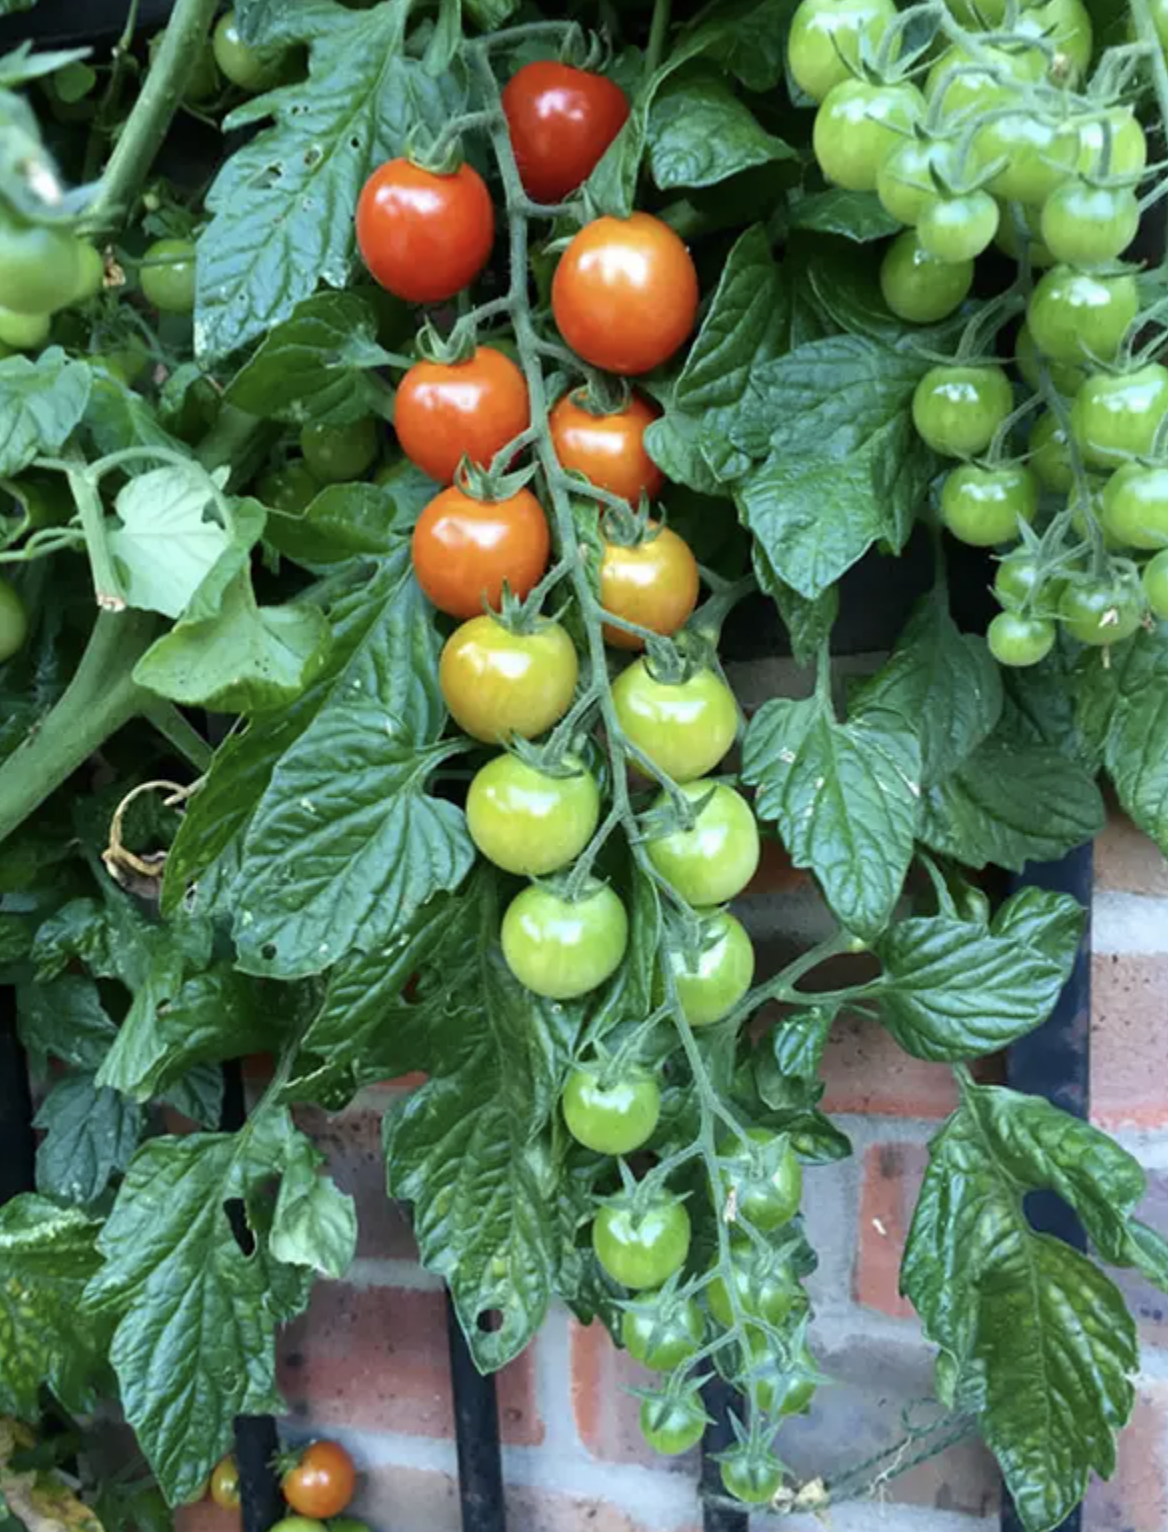 Cherry tomatoes ripening on vine, with a mix of red and green fruits against a brick wall background